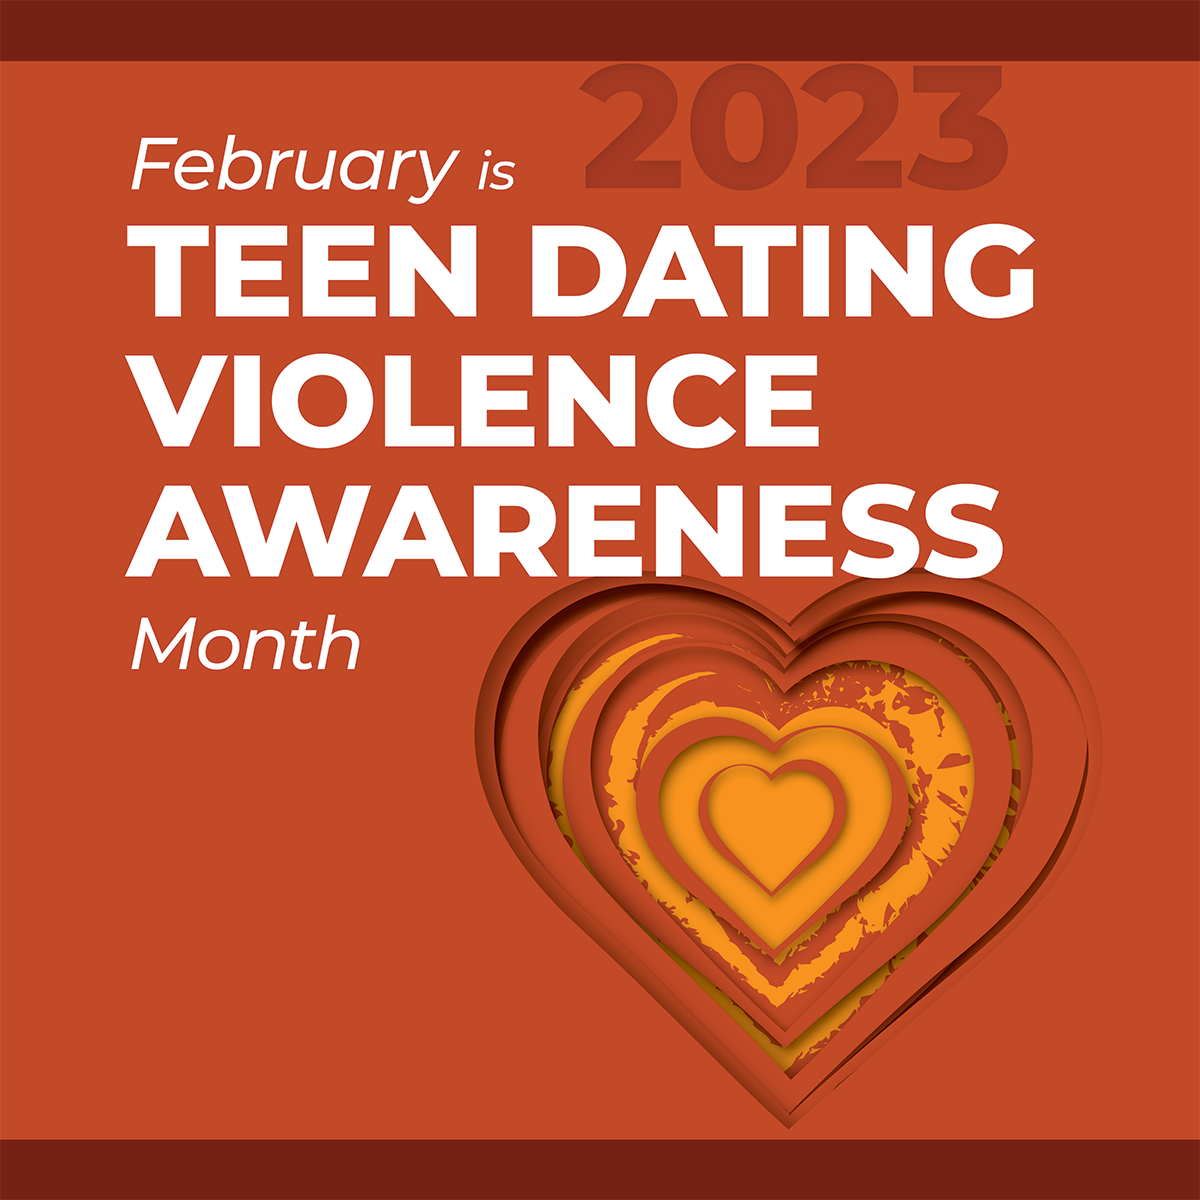 February is Teen Dating Violence Awareness Month - Instagram Graphic